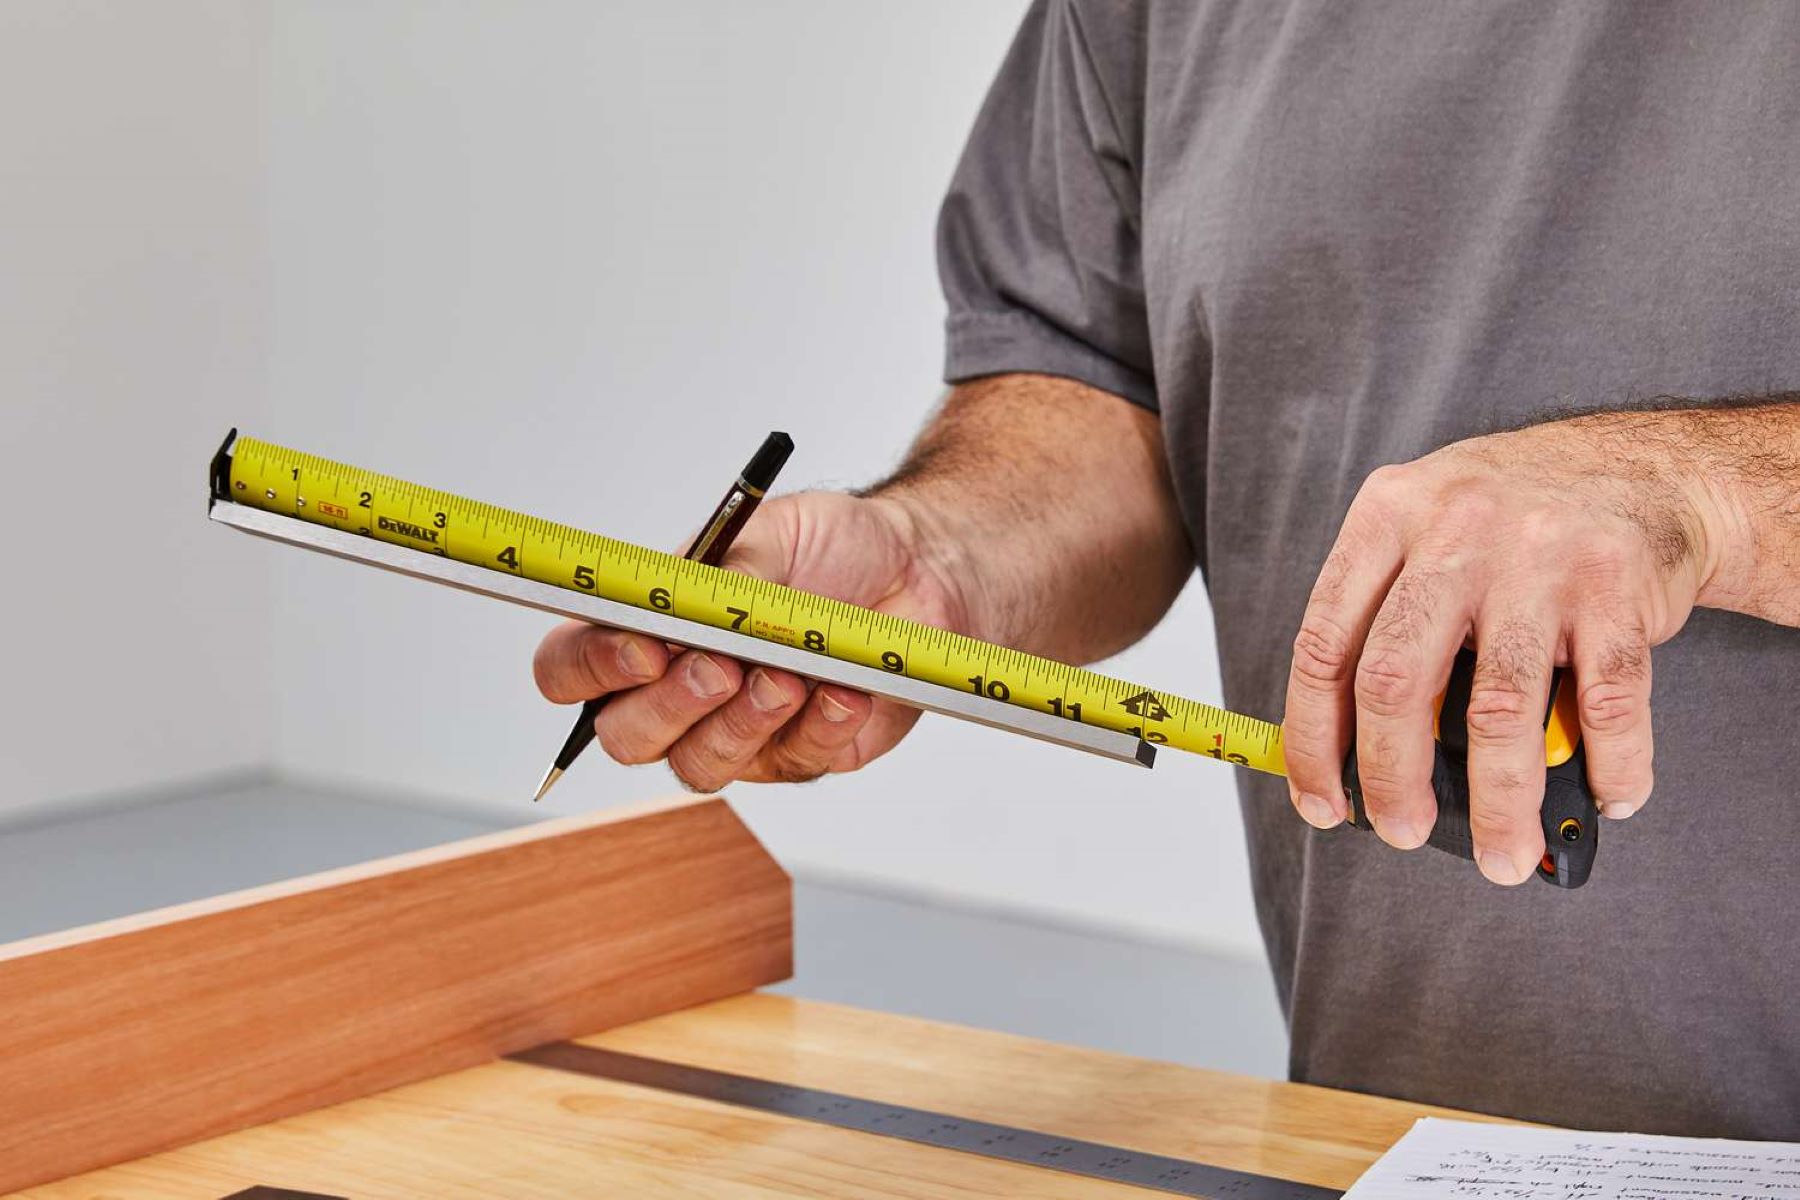 How To Measure Waist Size With A Measuring Tape